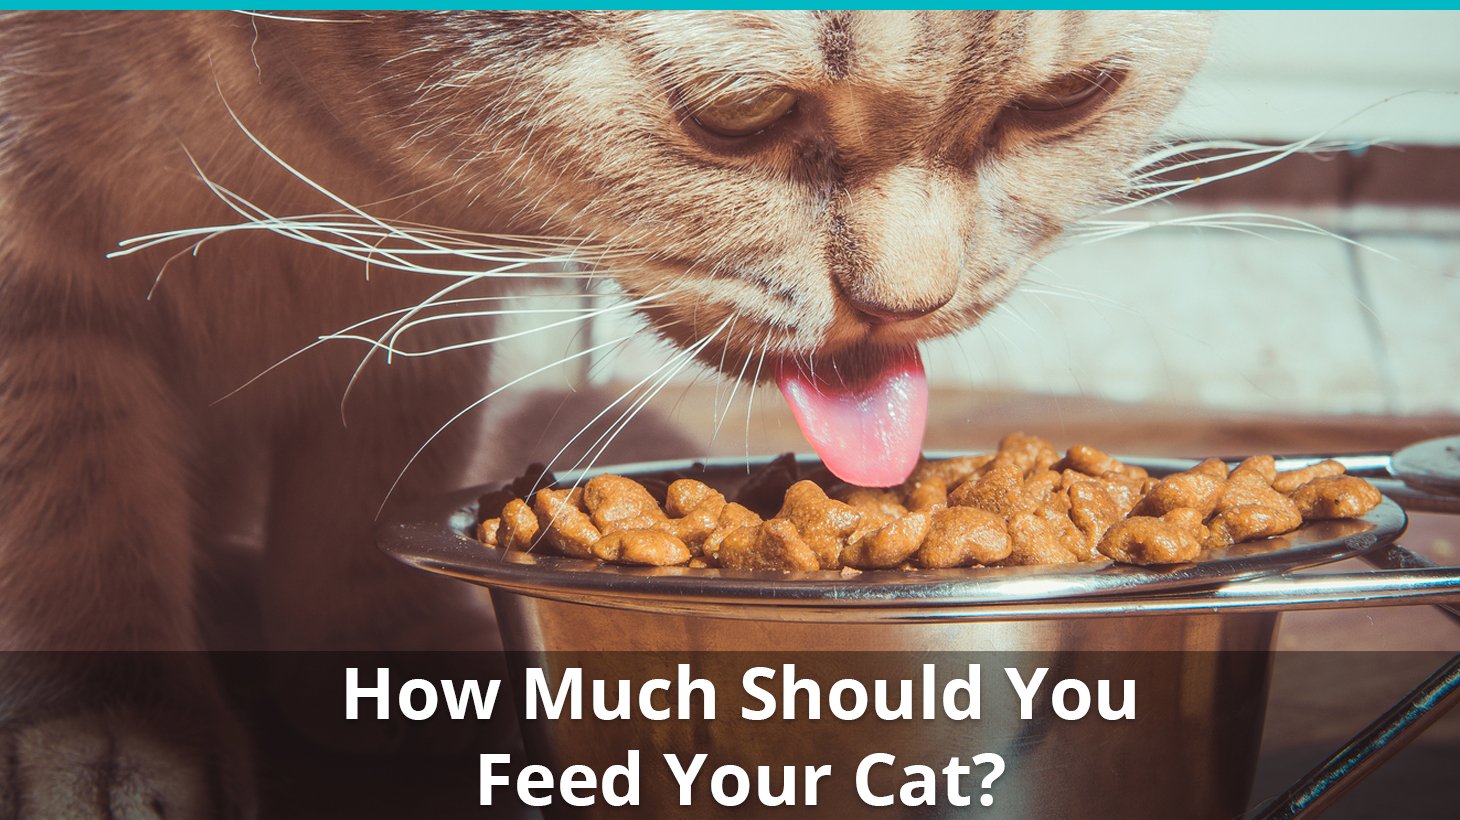 How Much Should I Feed My Cat The Cat Feeding Guide